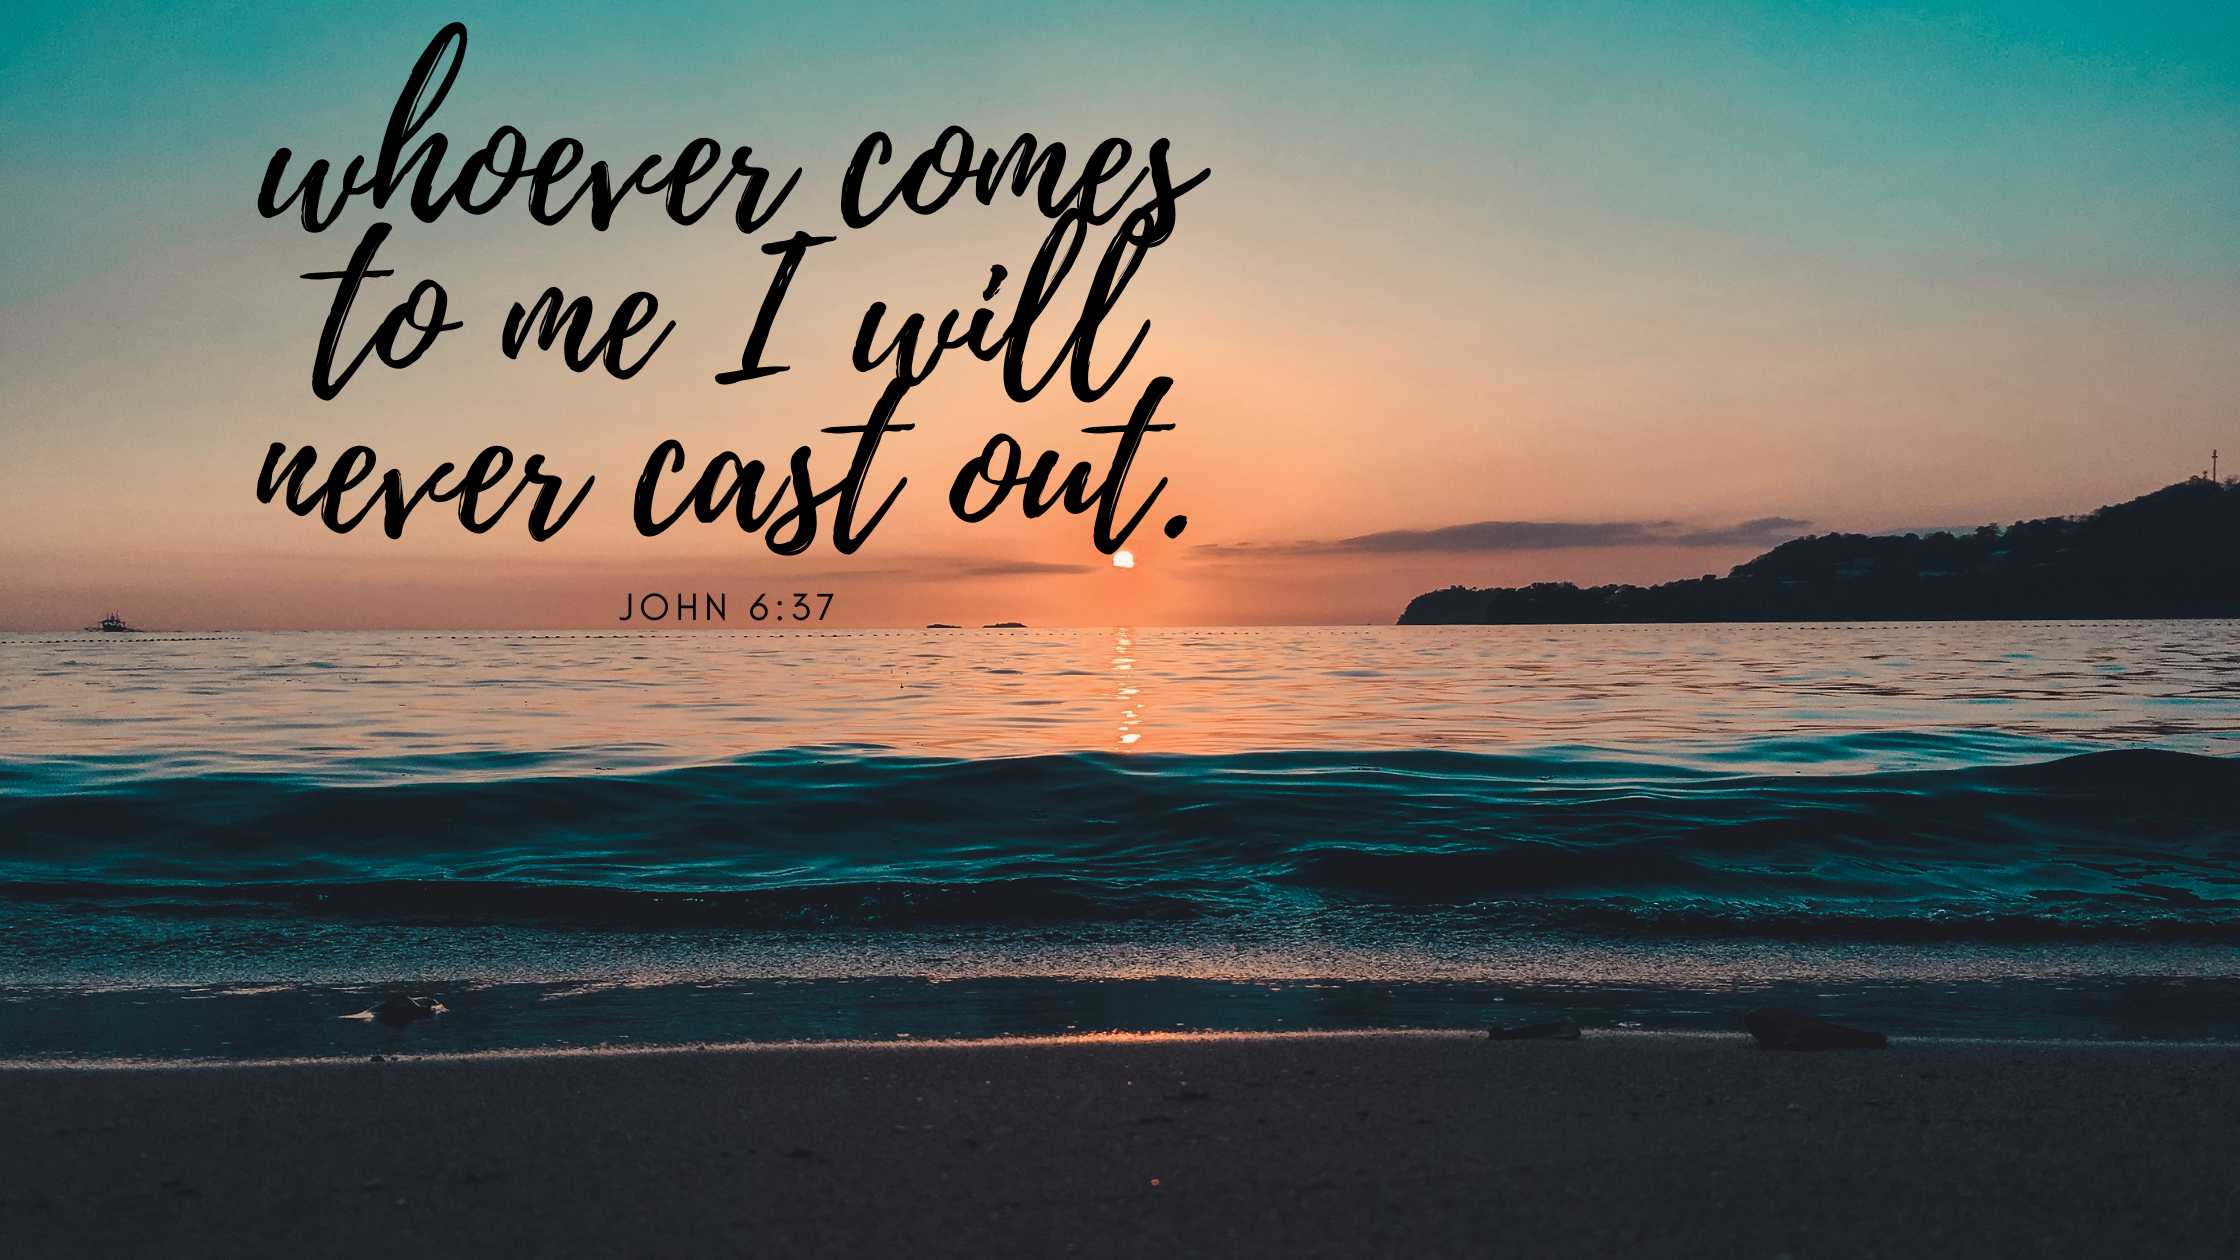 whoever comes to me I will never cast out.” John 637